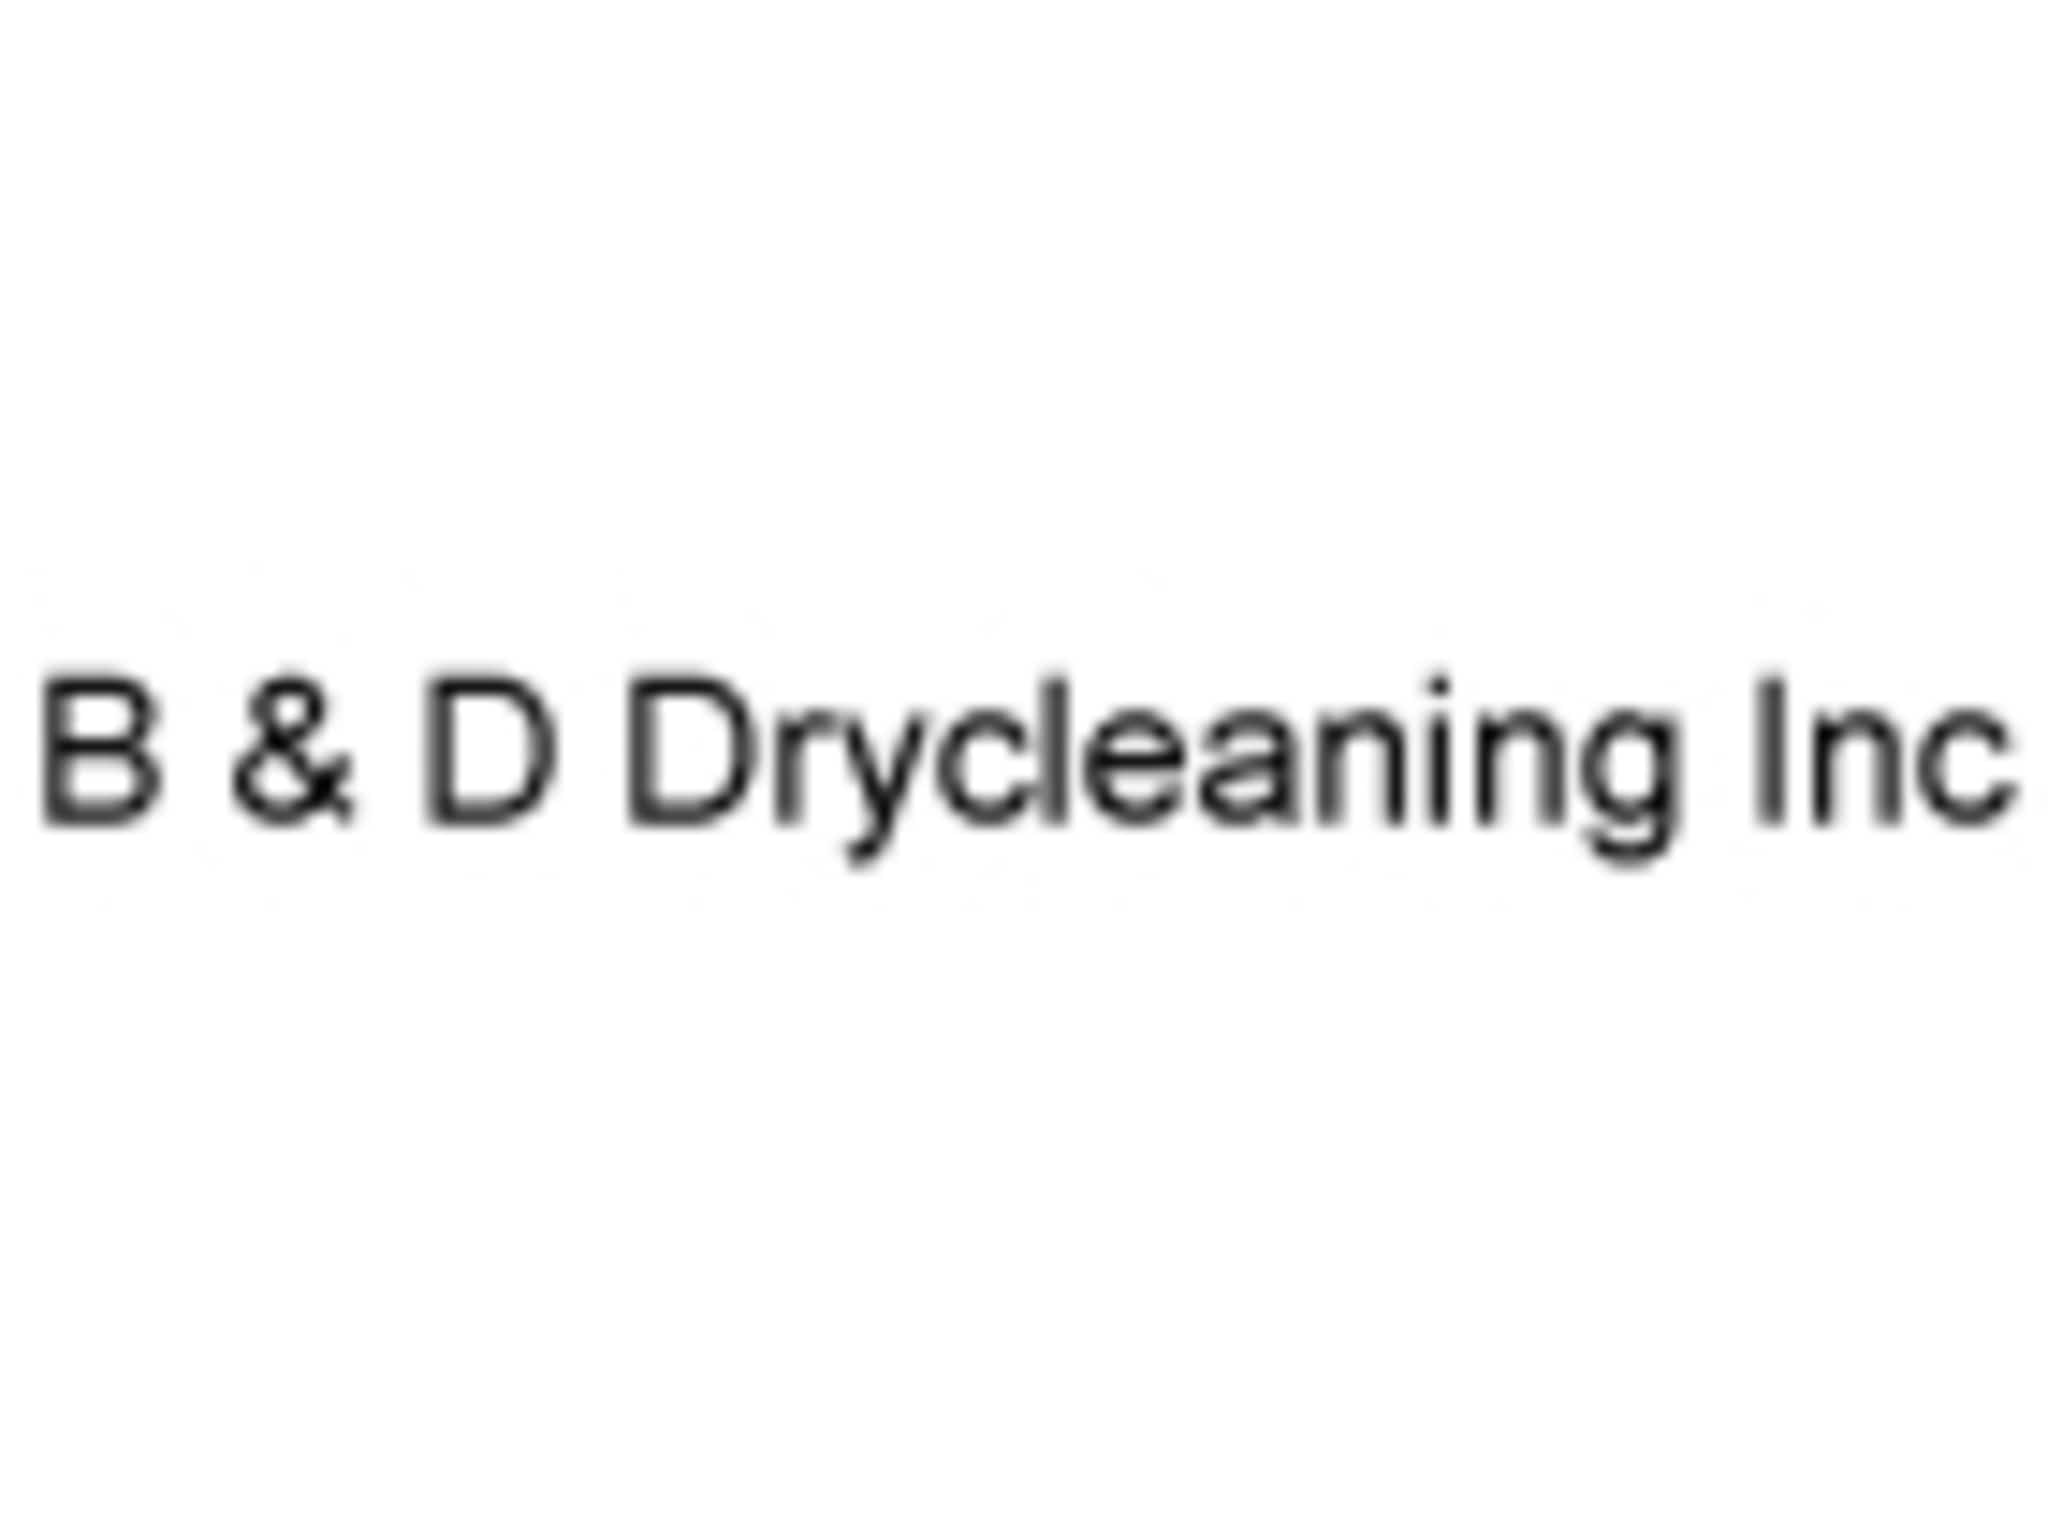 photo B & D Drycleaning Inc